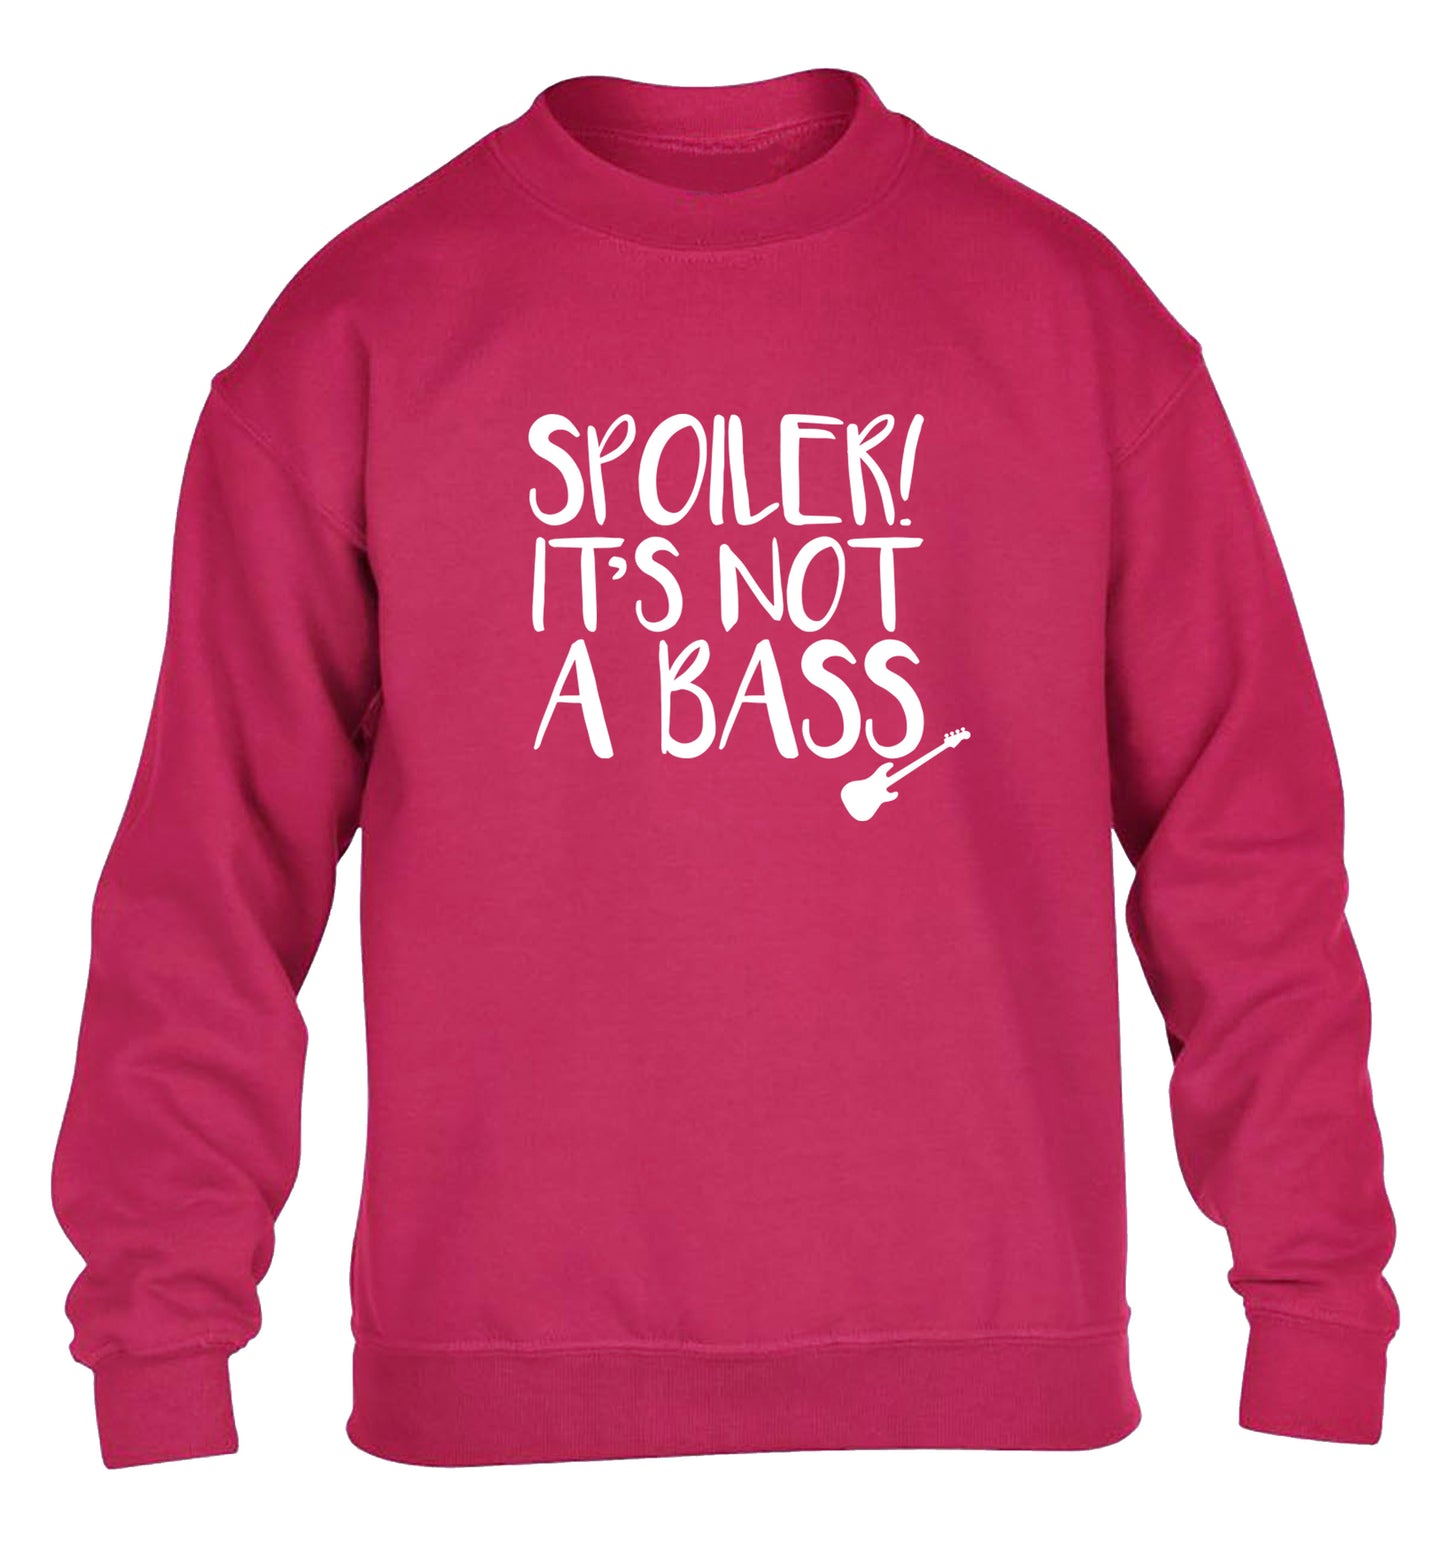 Spoiler it's not a bass children's pink sweater 12-13 Years